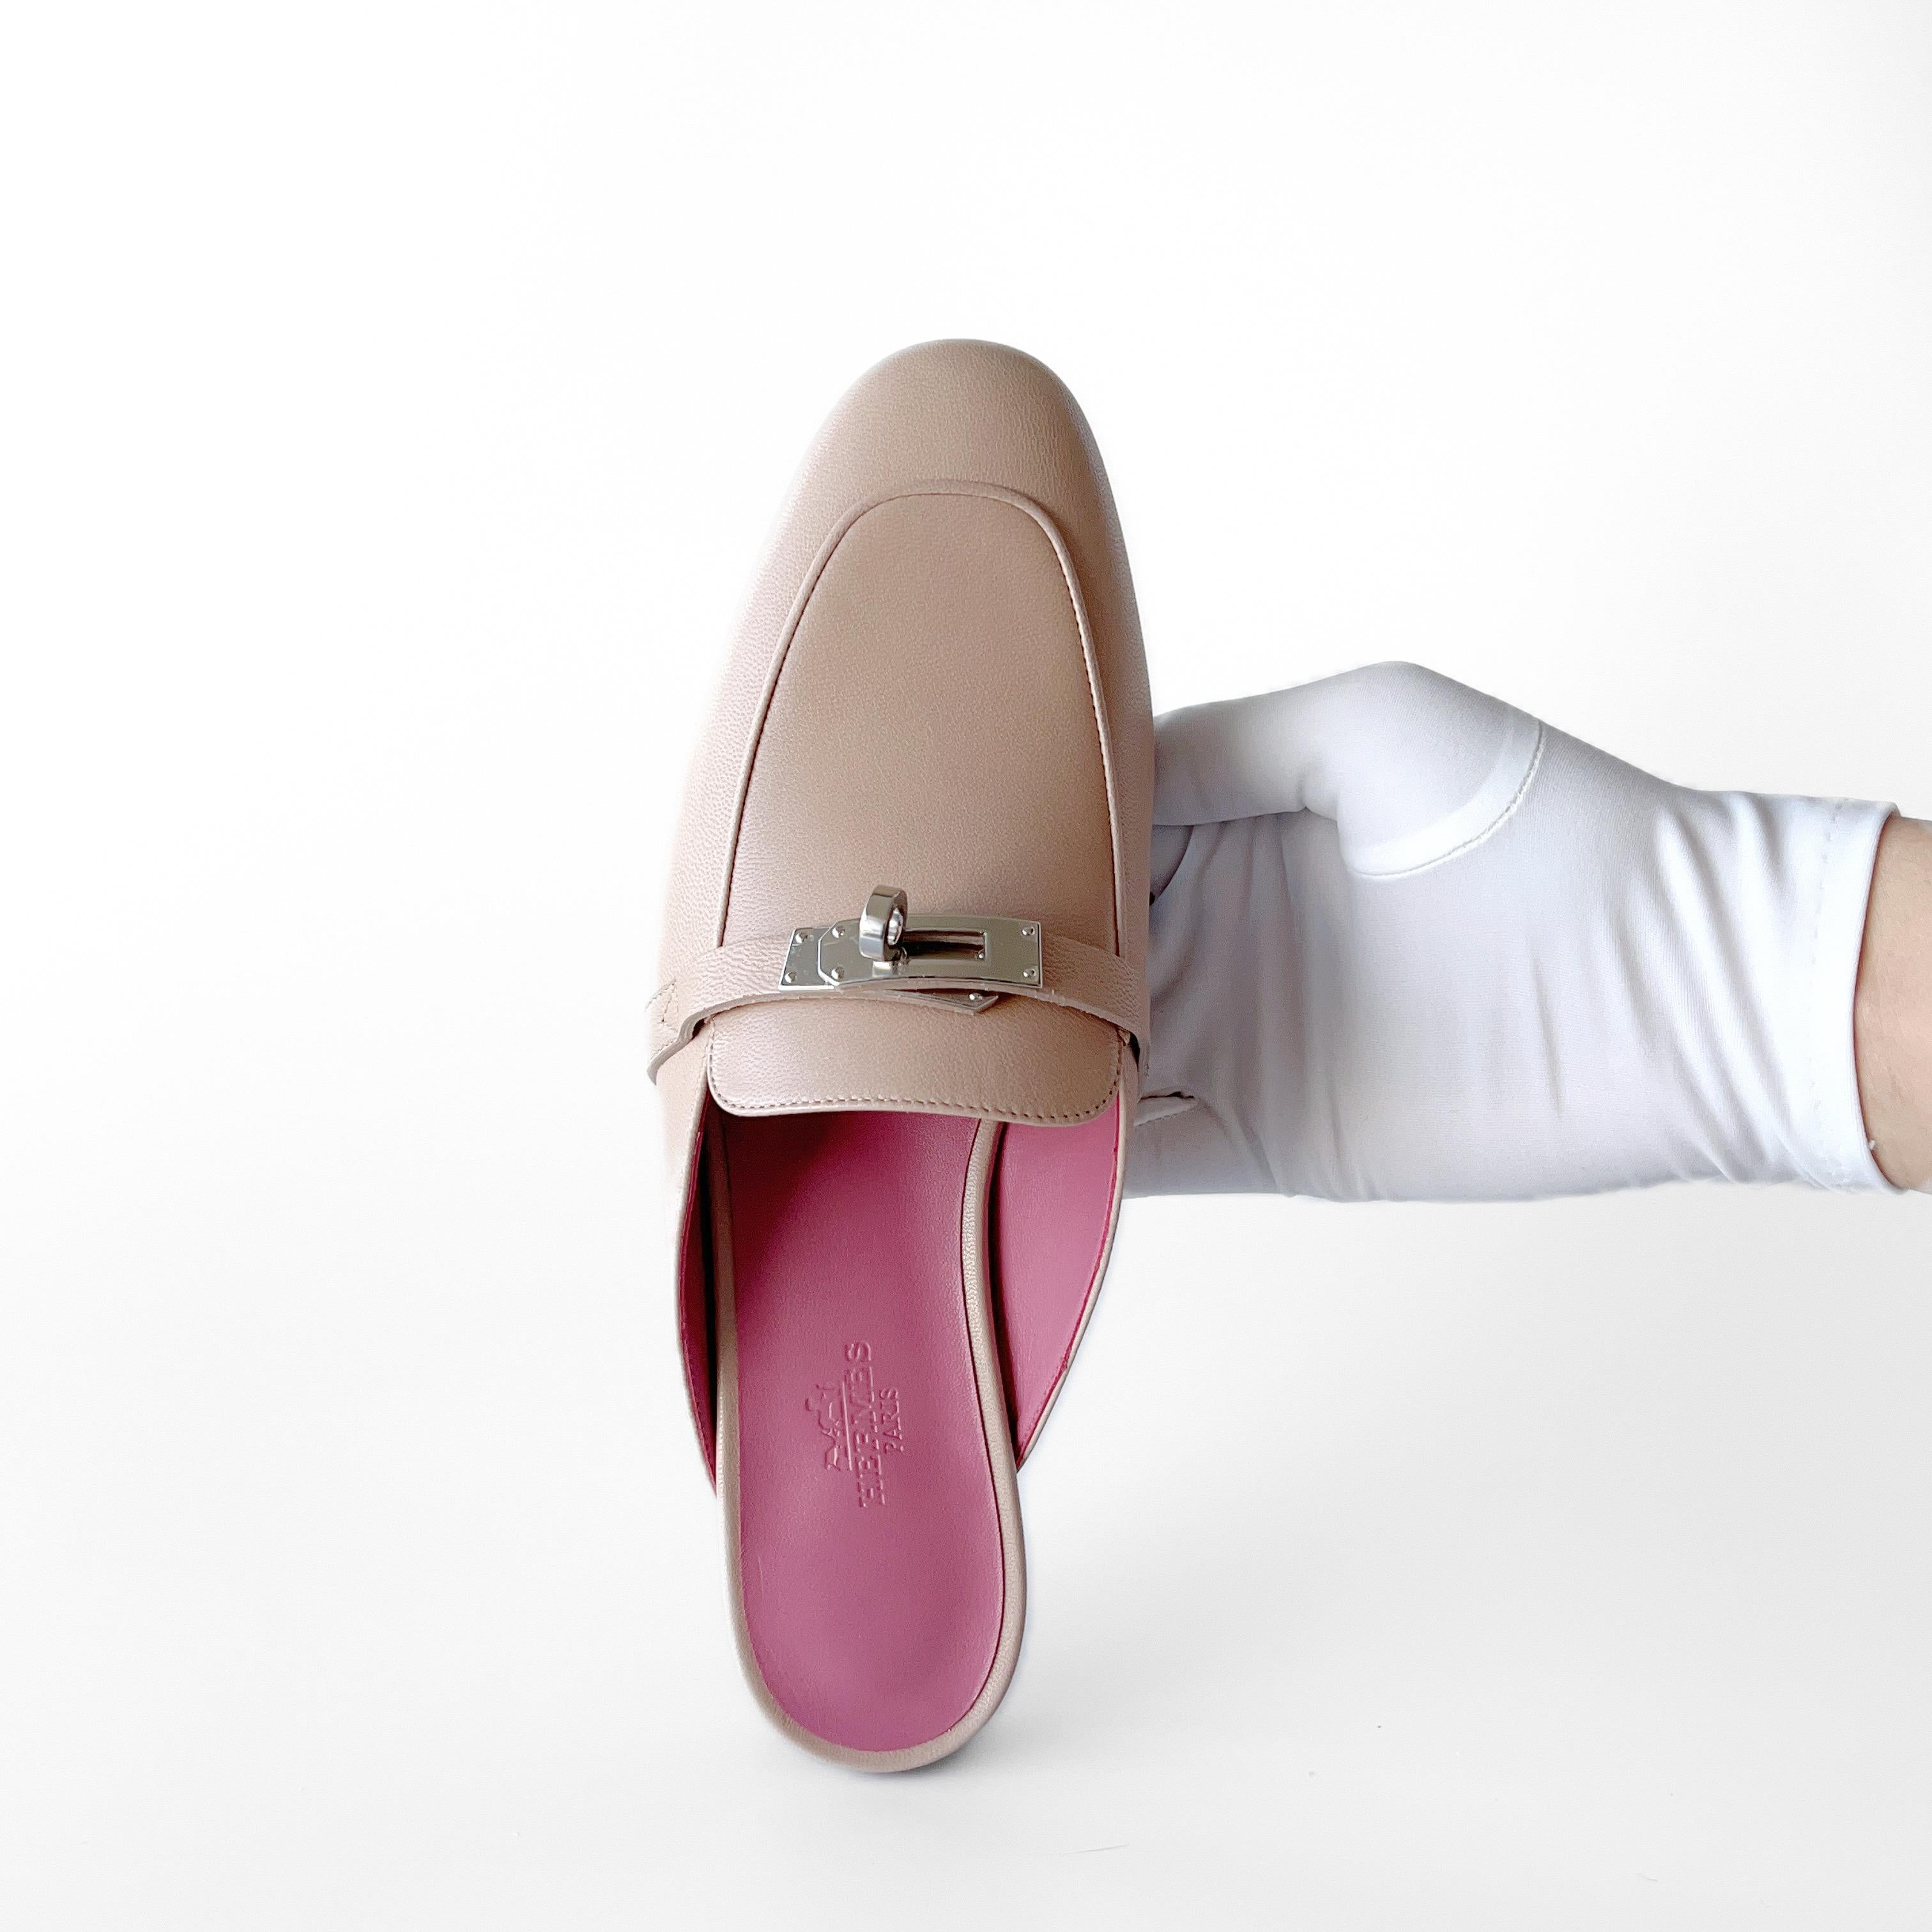 Shop this classic Hermes Mule Slipper in Beige Nude with a Pink In Sole. This pair of Oz Mule slippers has a beautiful Palladium Plated buckle in the classic Kelly style. They are made to be true fitting to size. These are perfect for everyday